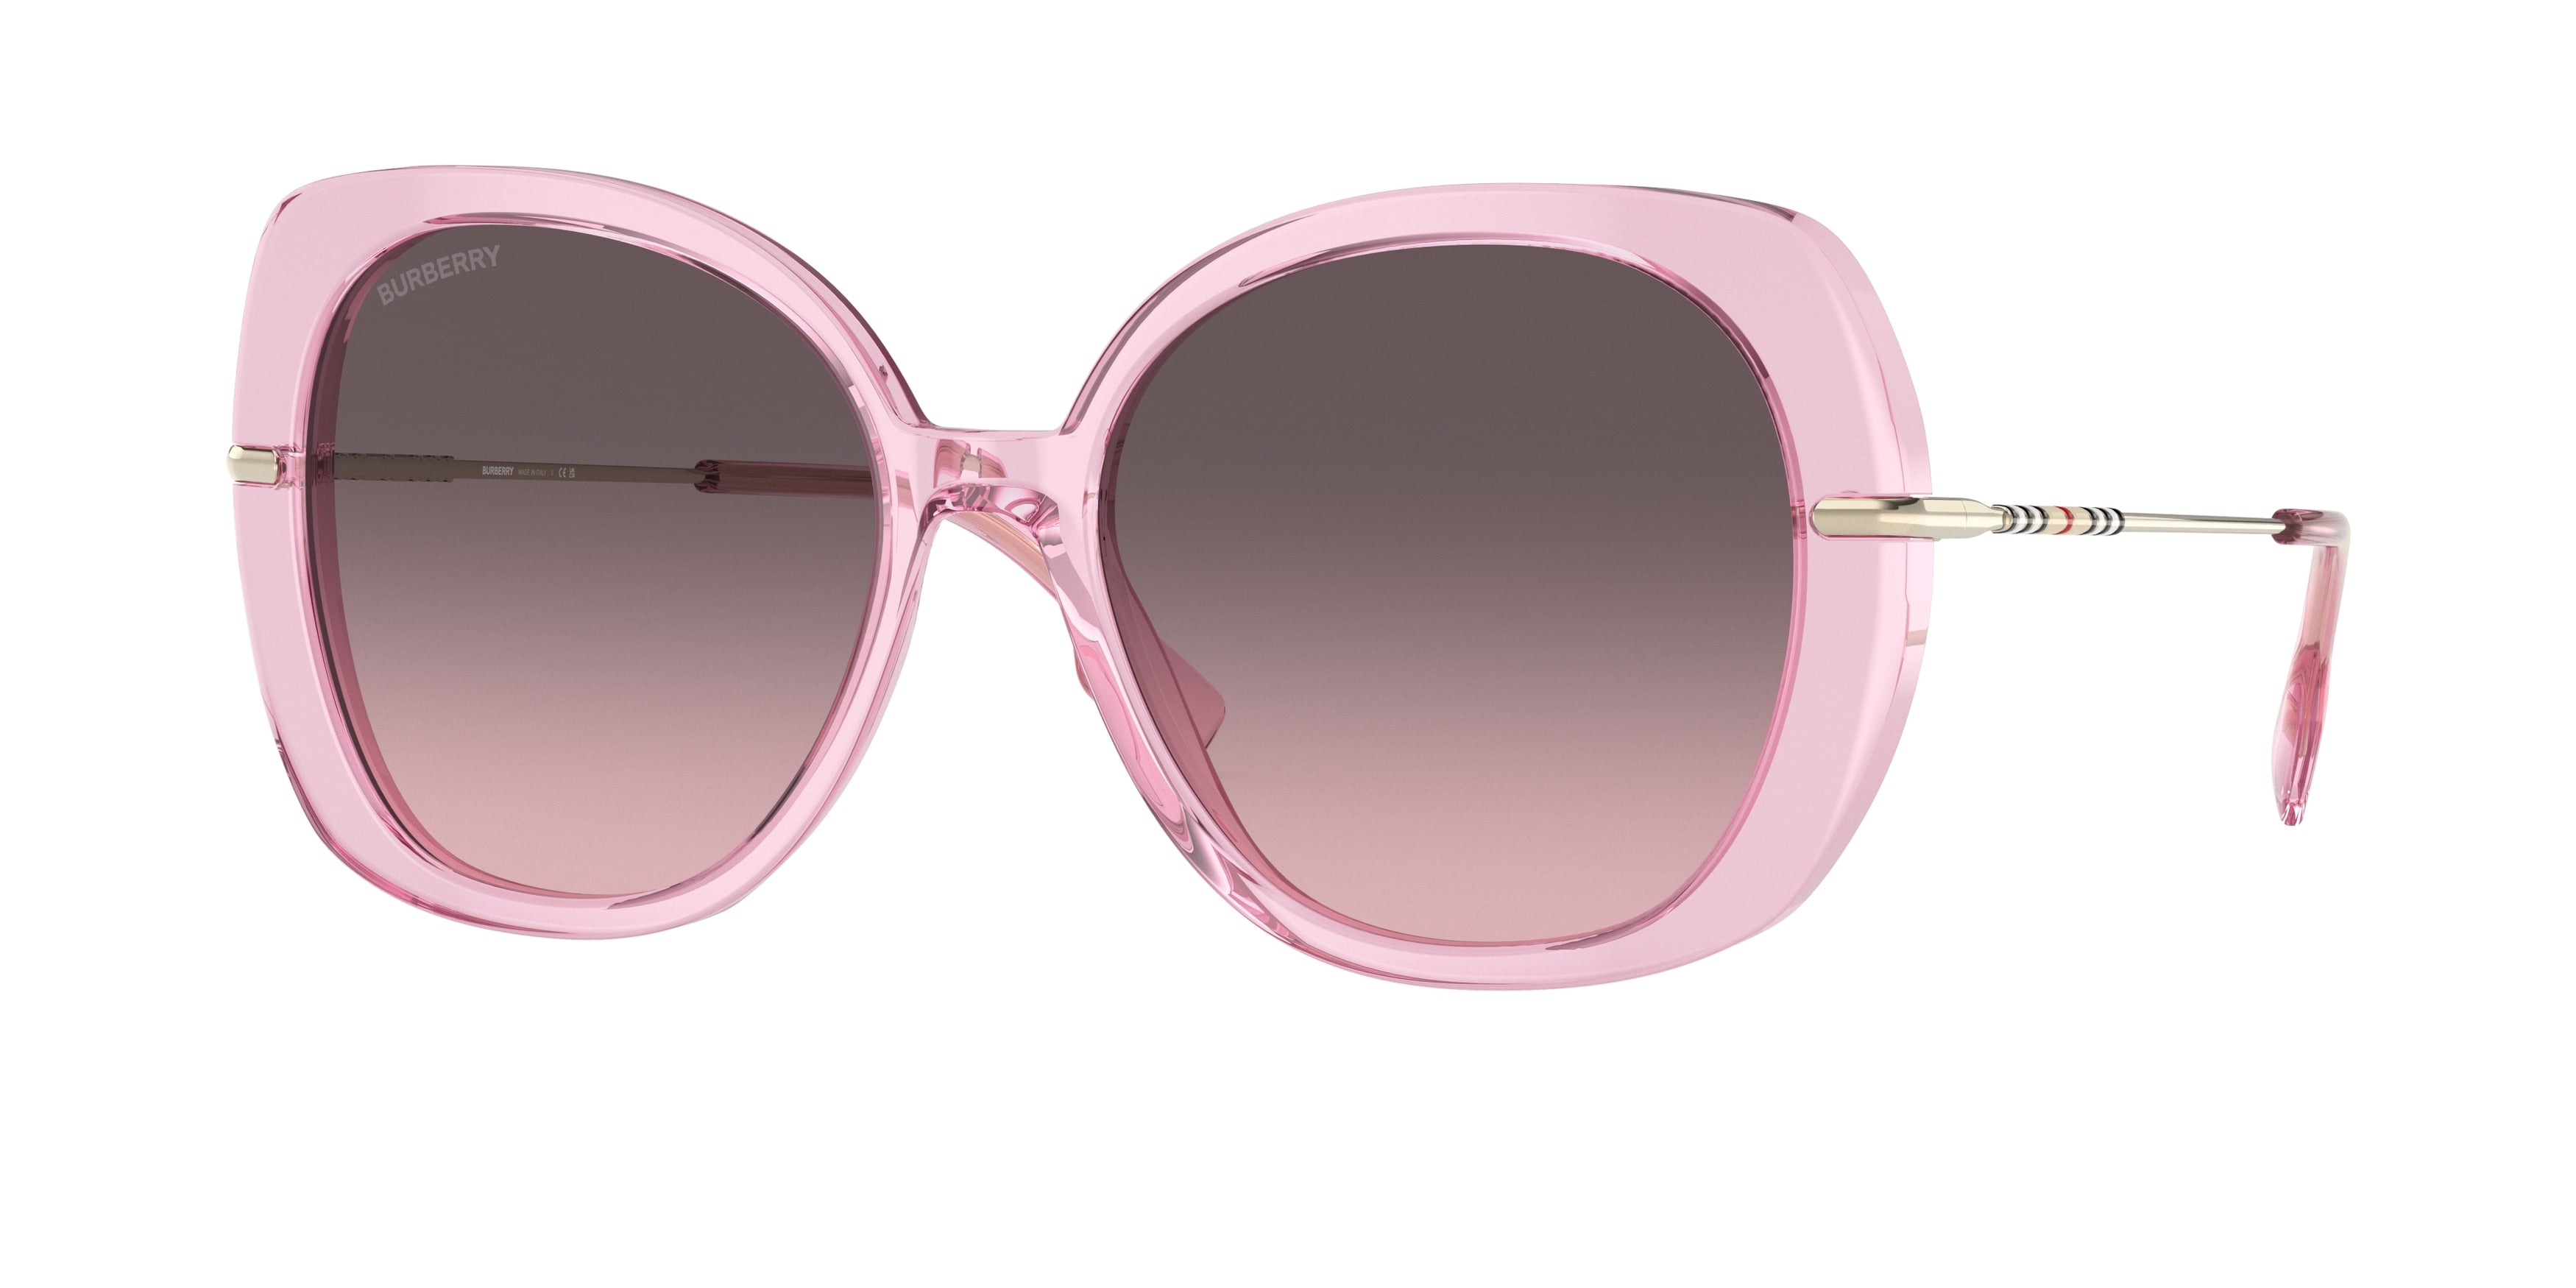 Burberry EUGENIE BE4374 Square Sunglasses  40245M-Pink 55-140-17 - Color Map Pink